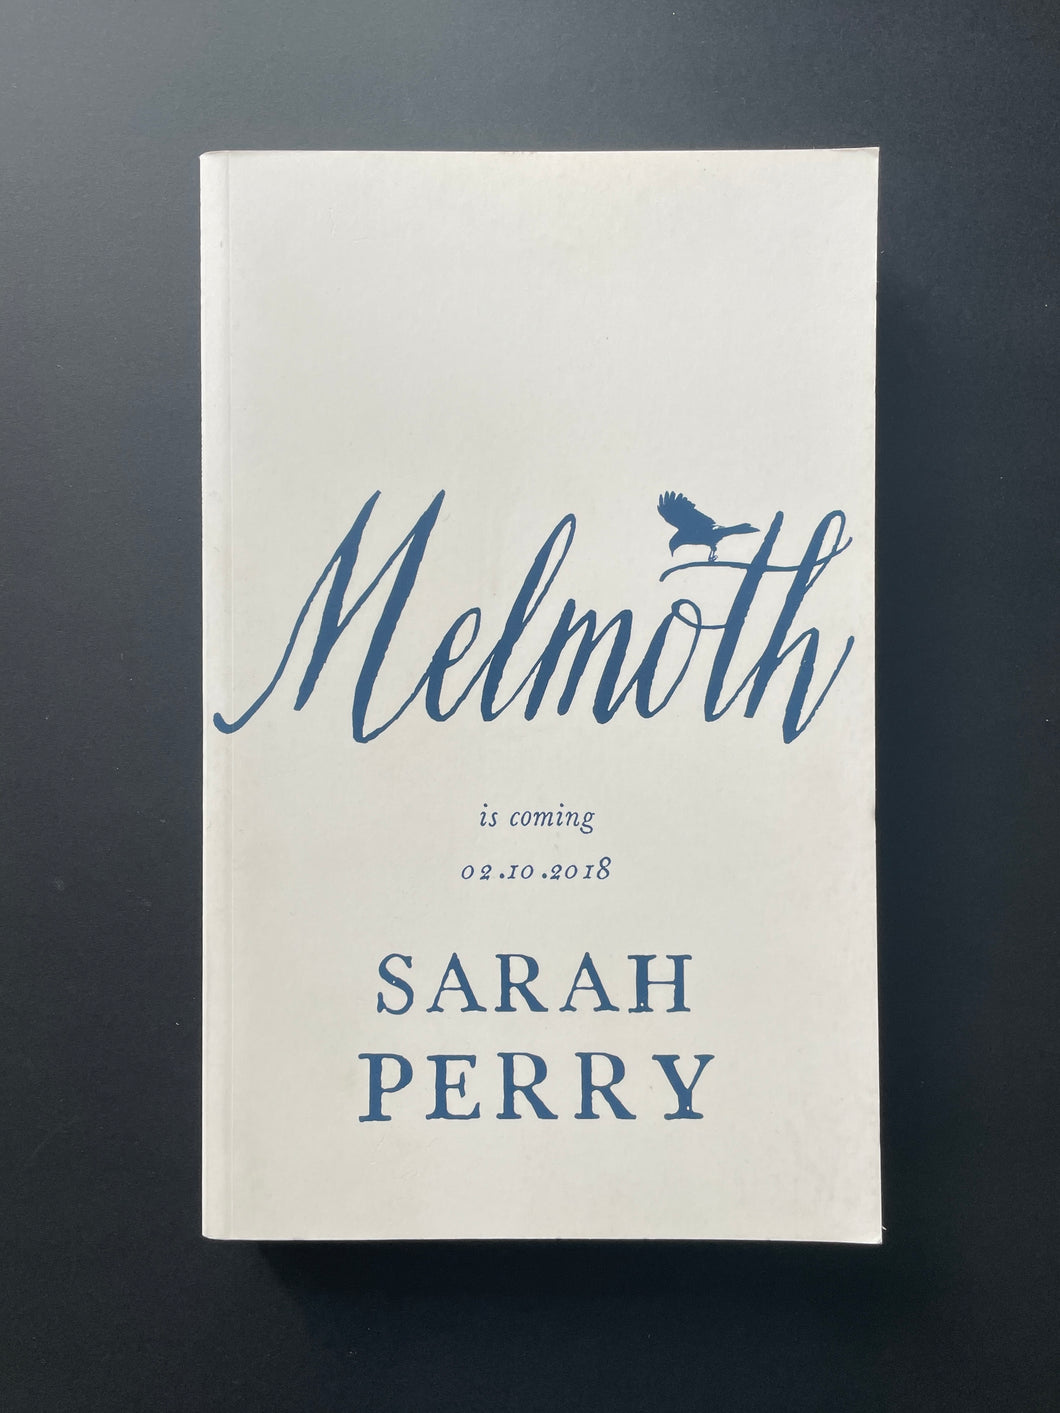 Melmoth by Sarah Perry (Uncorrected Proof Copy): photo of the front cover.